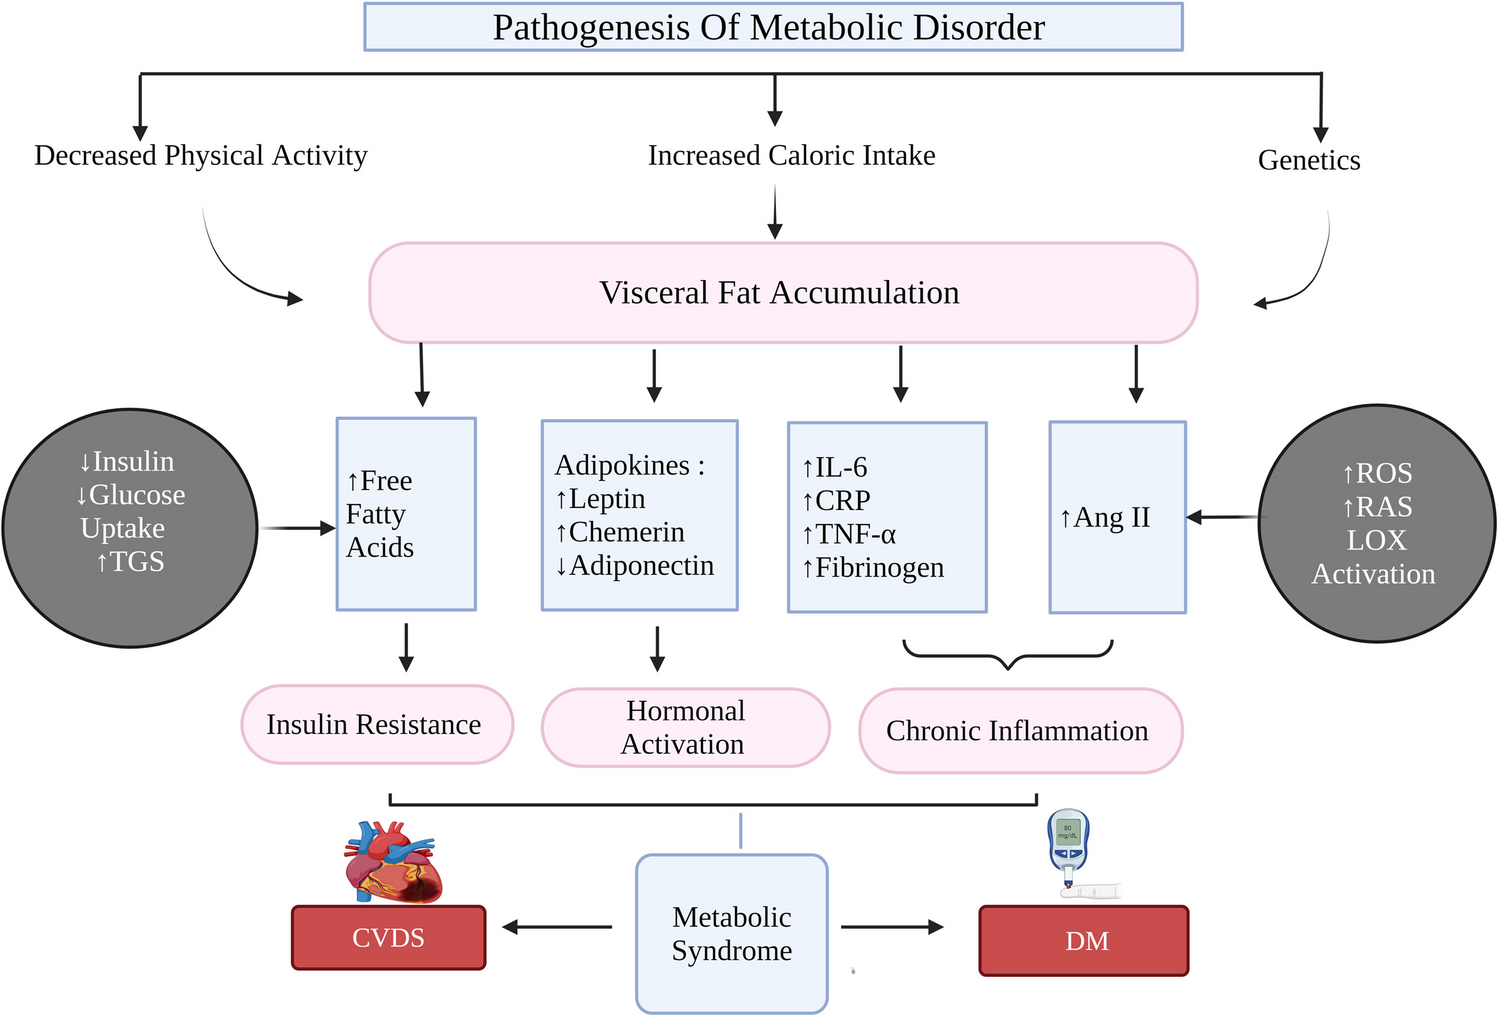 Therapeutic Monoclonal Antibodies for Metabolic Disorders: Major Advancements and Future Perspectives